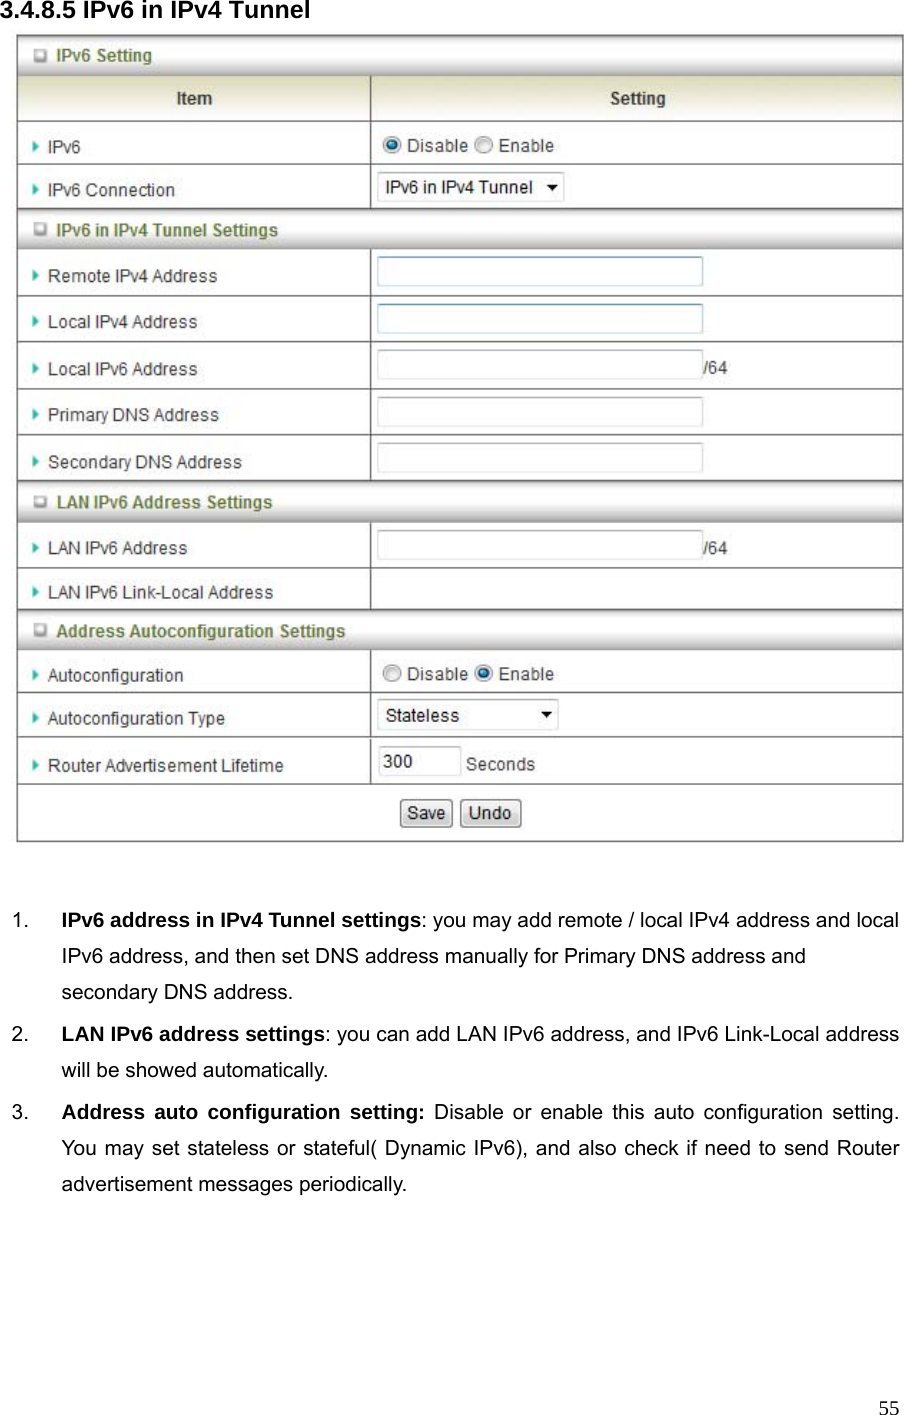  553.4.8.5 IPv6 in IPv4 Tunnel   1.  IPv6 address in IPv4 Tunnel settings: you may add remote / local IPv4 address and local IPv6 address, and then set DNS address manually for Primary DNS address and secondary DNS address. 2.  LAN IPv6 address settings: you can add LAN IPv6 address, and IPv6 Link-Local address will be showed automatically. 3.  Address auto configuration setting: Disable or enable this auto configuration setting. You may set stateless or stateful( Dynamic IPv6), and also check if need to send Router advertisement messages periodically.    